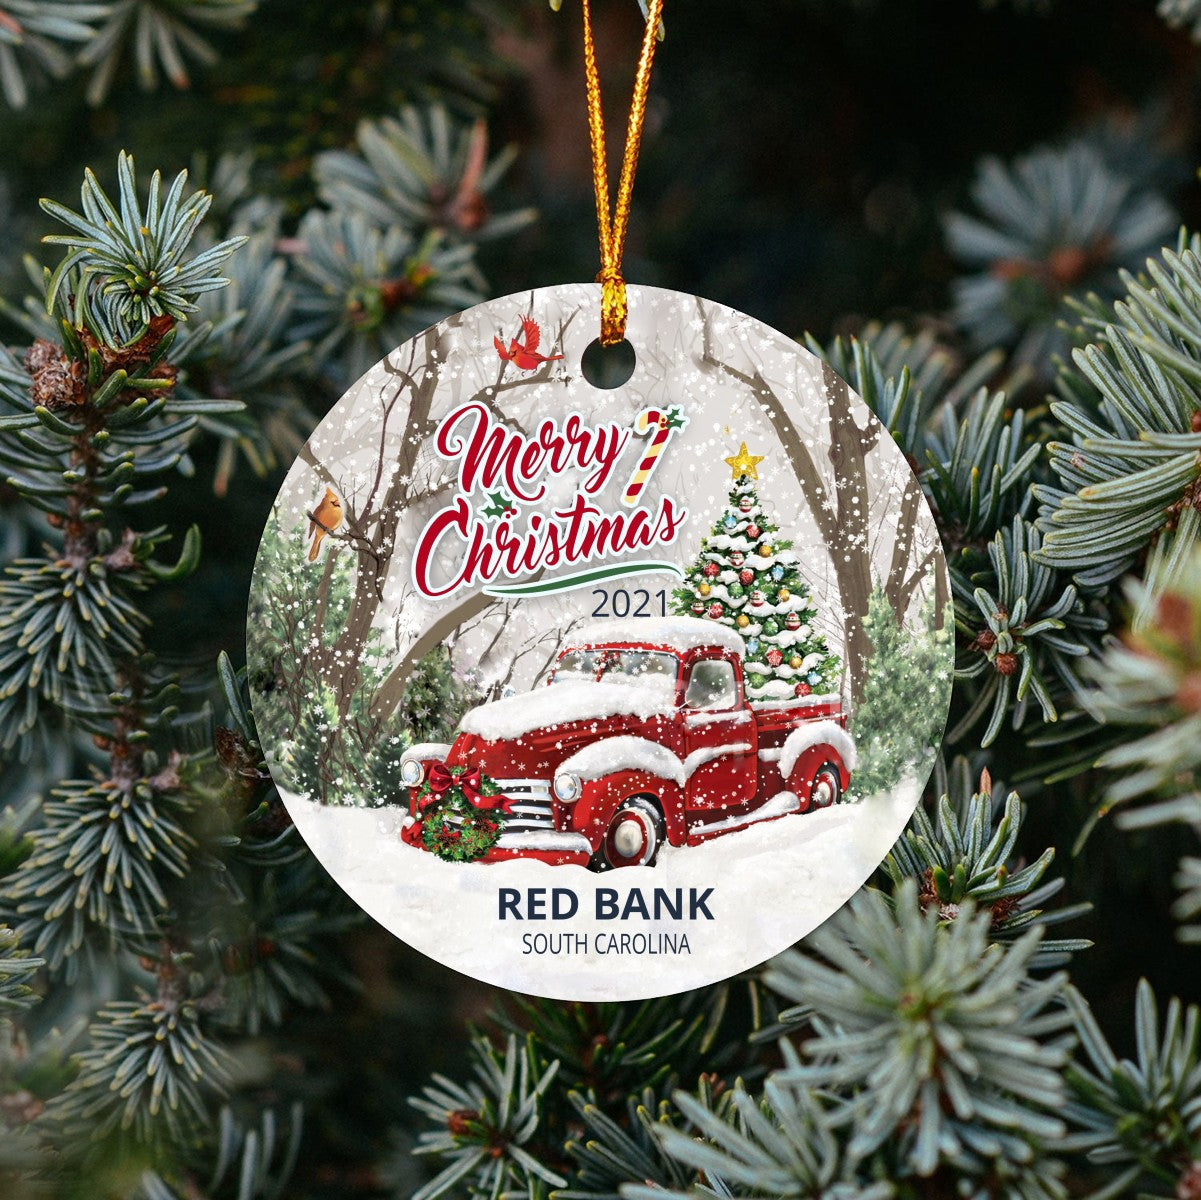 Christmas Tree Ornaments Red Bank - Ornament With Name City, State Red Bank South Carolina SC Ornament - Red Truck Xmas Ornaments 3'' Plastic Gift For Family, Friend And Housewarming